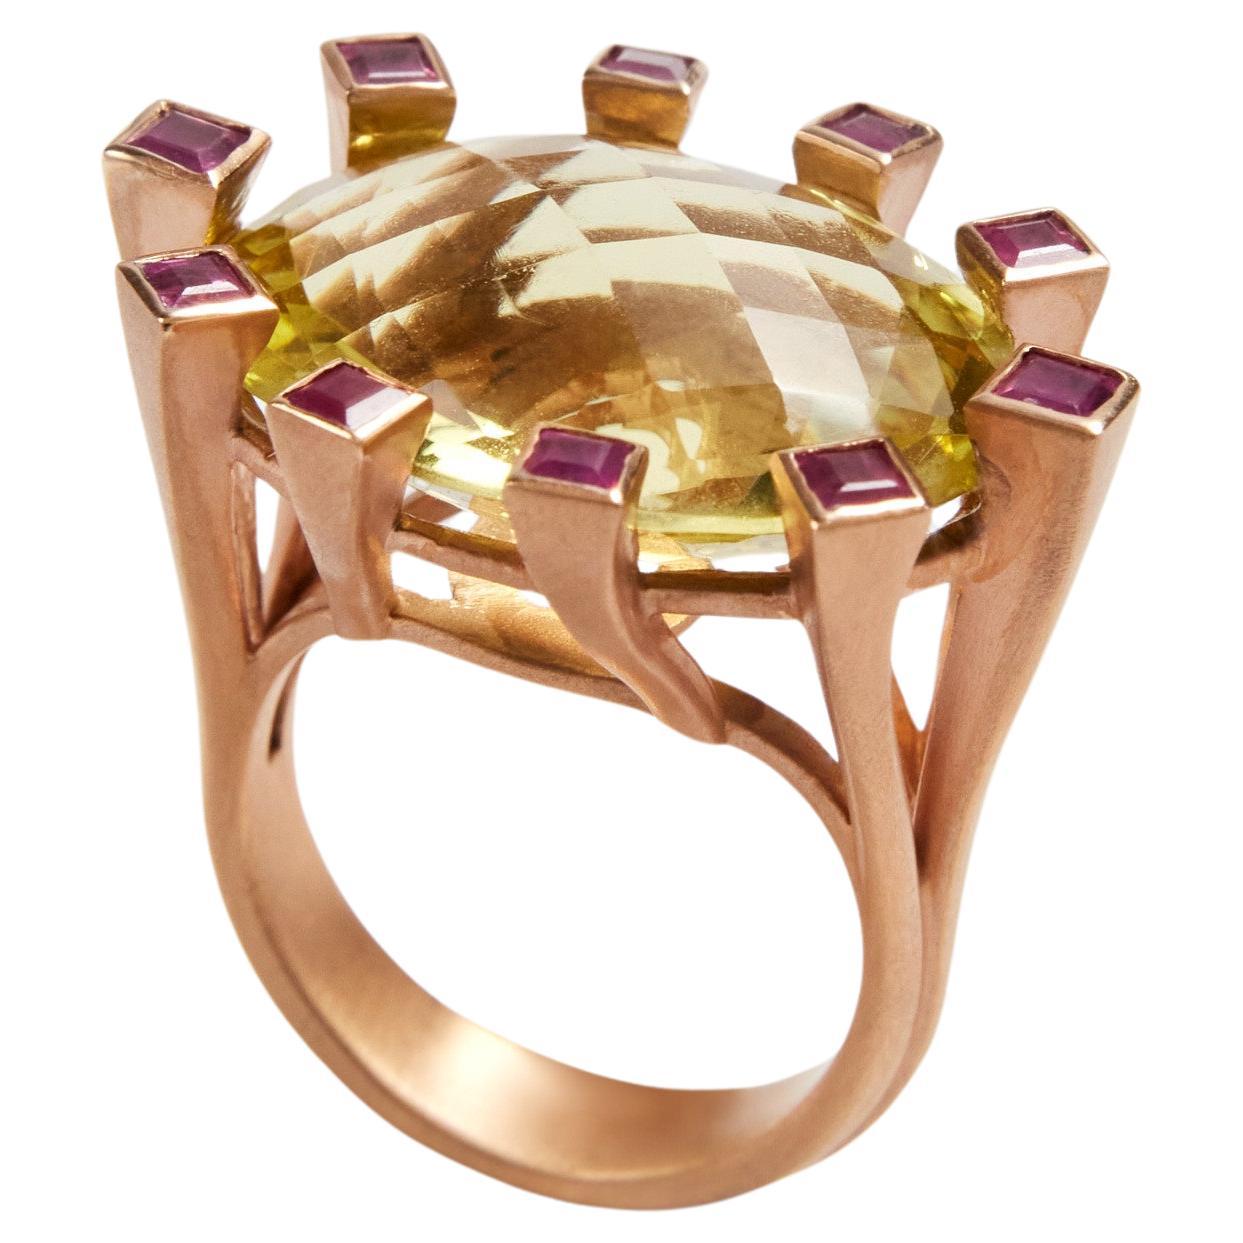 Giulia Colussi Cocktail Rings